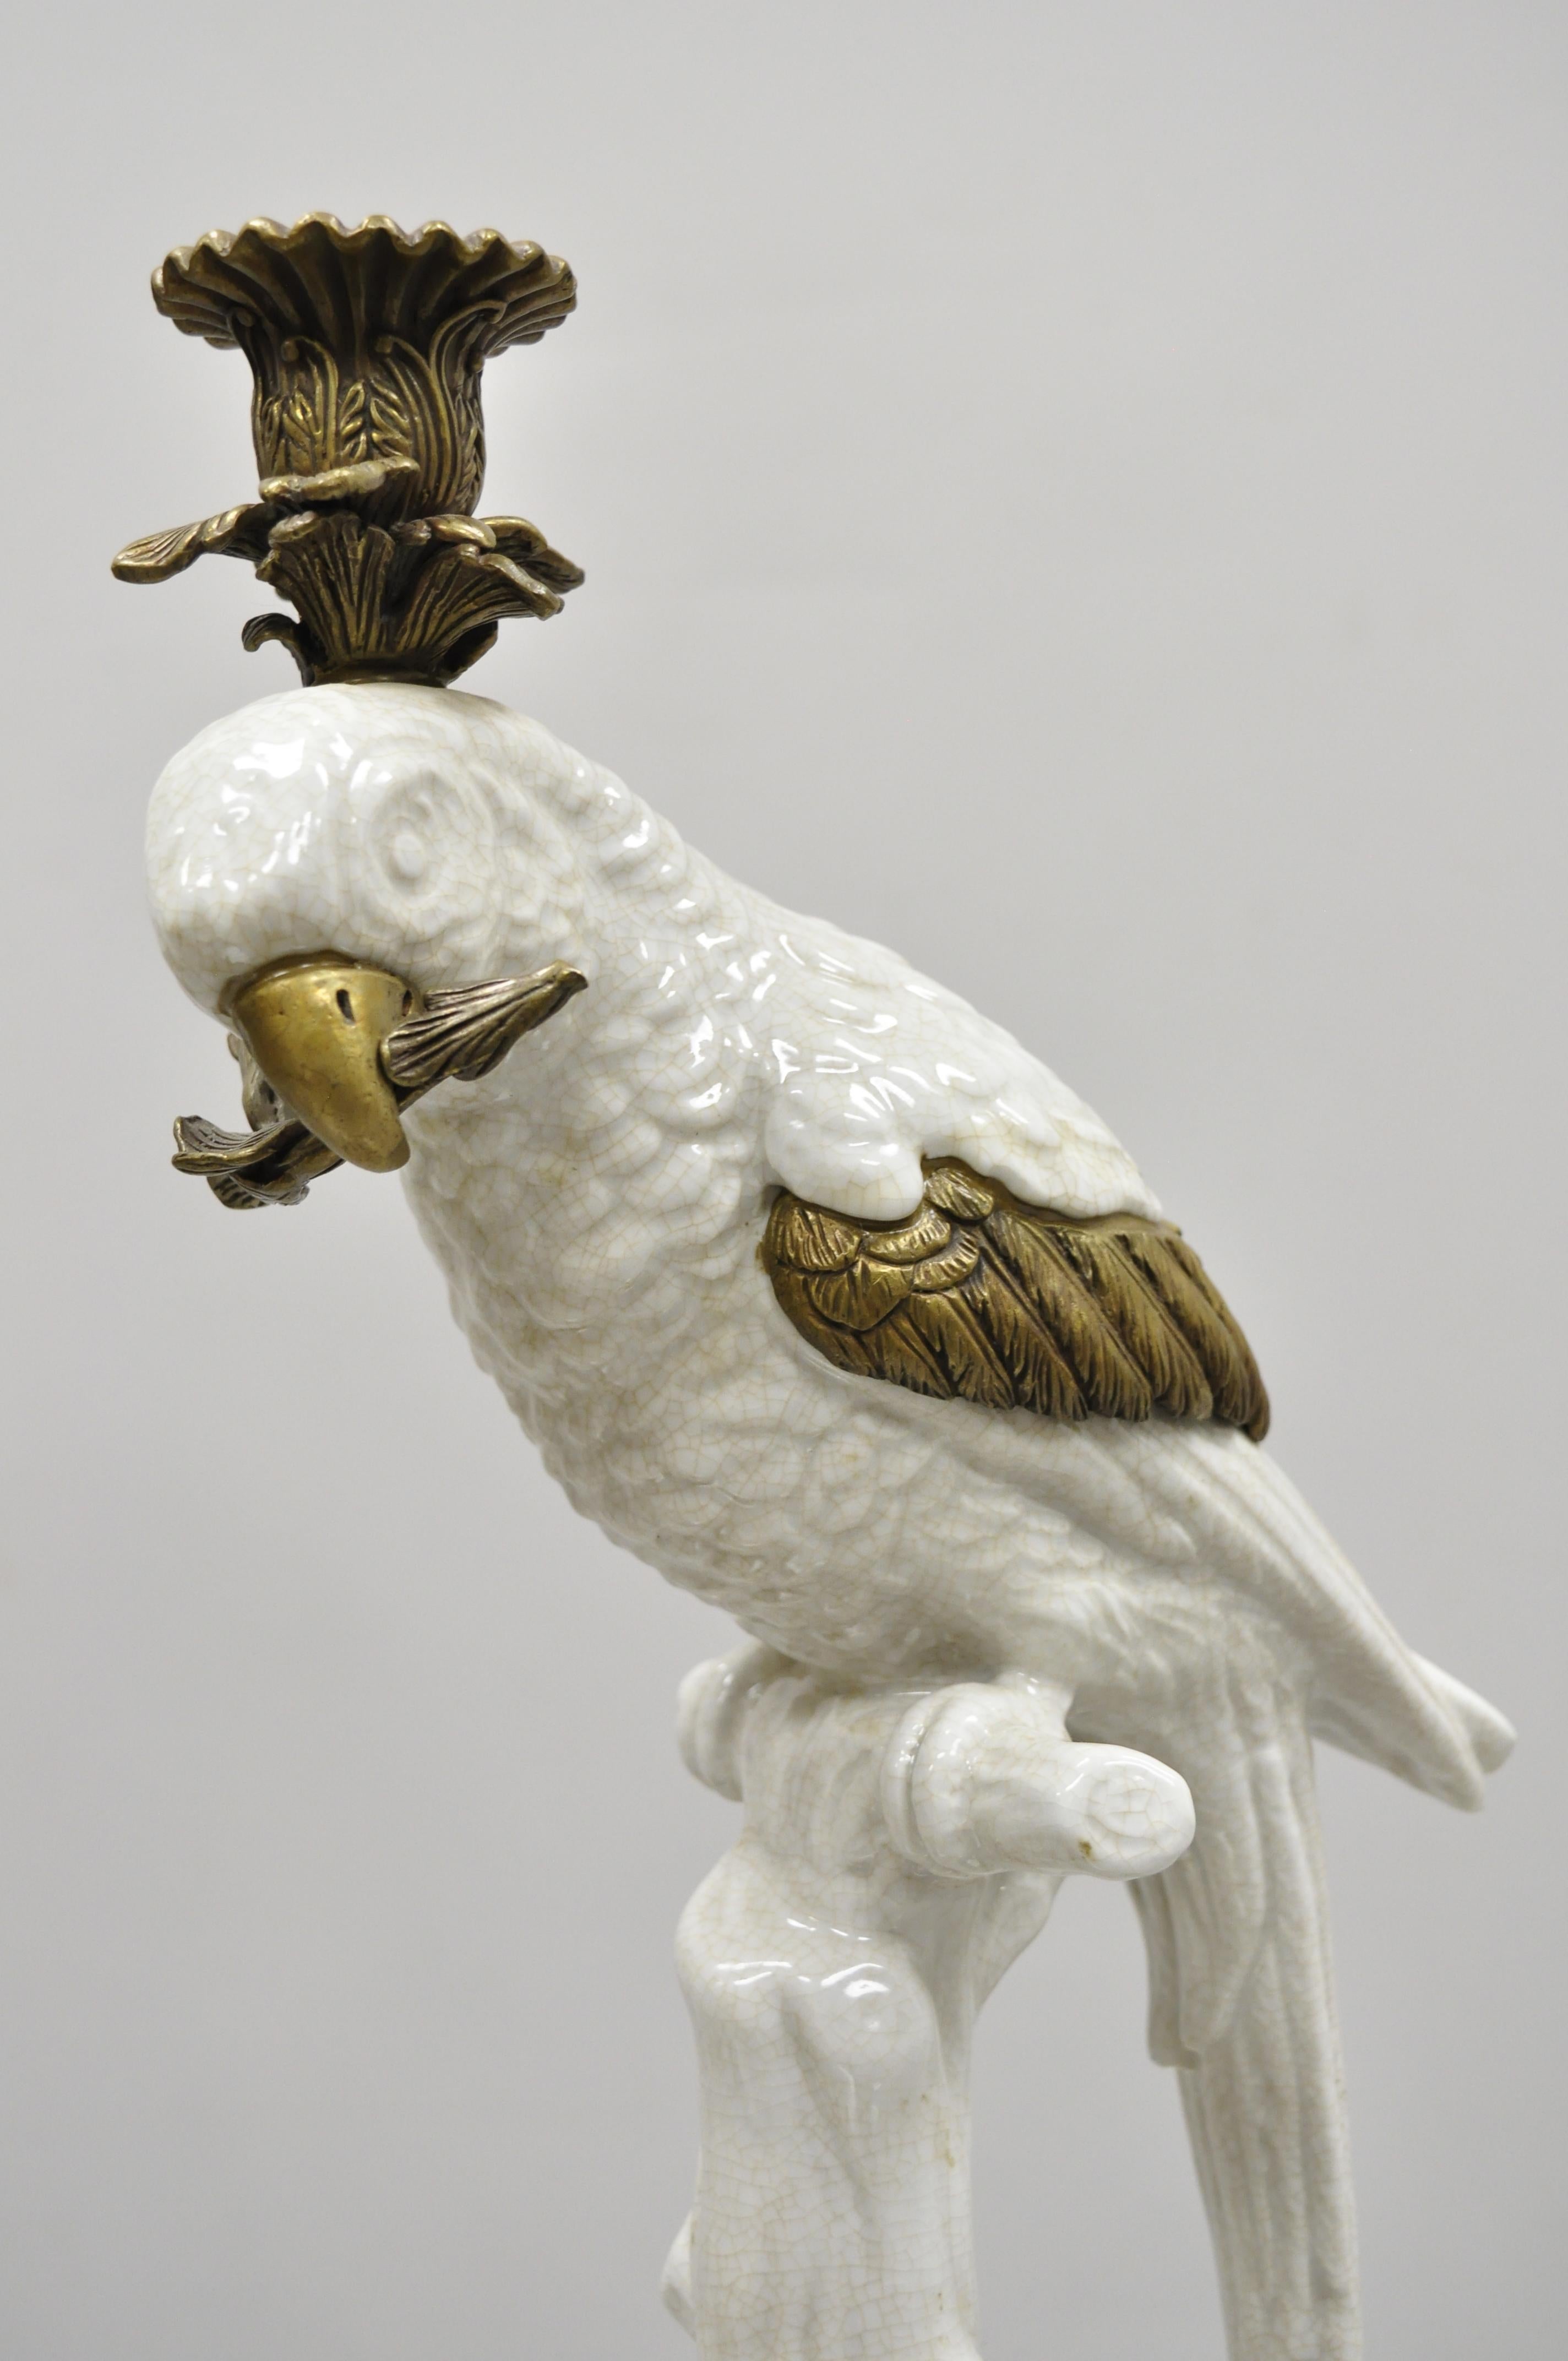 Pair of porcelain and bronze French style white parrot candlestick candle holders. Listing includes ornate brass base and ormolu, porcelain parrot figure, right and left form, circa late 20th century. Measurements: 14.5